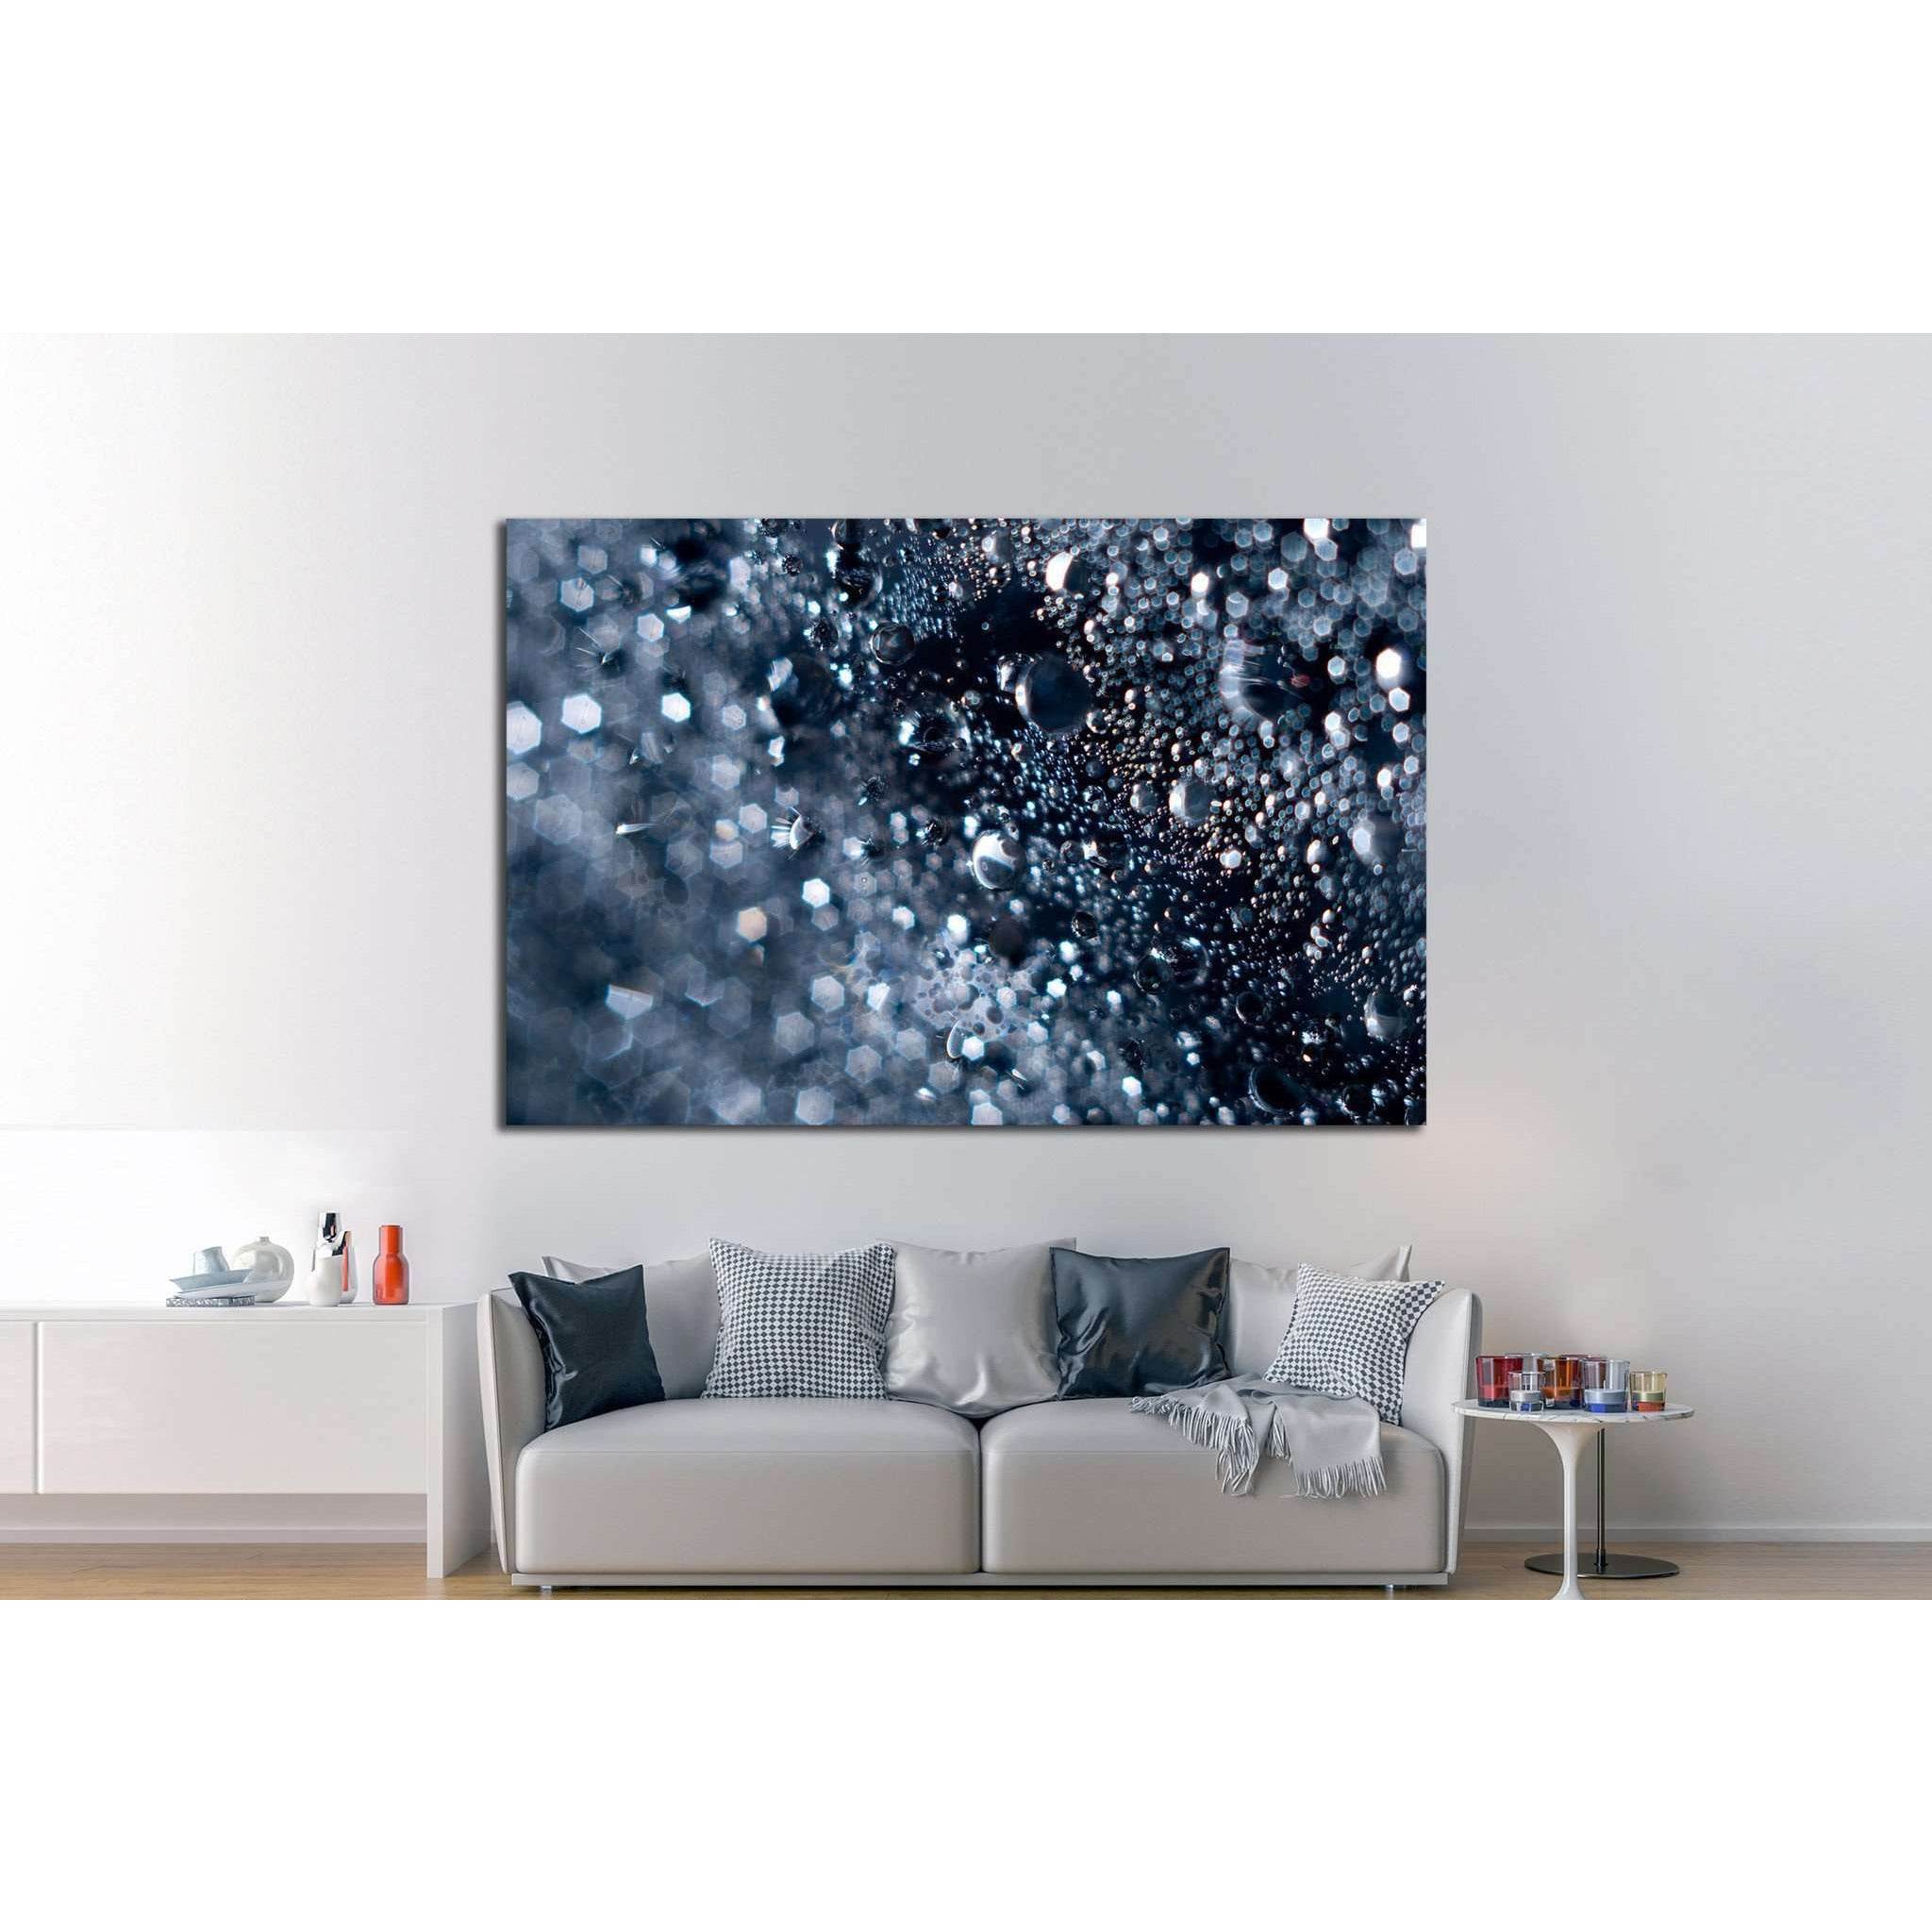 Abstract water with bubbles №1042 - canvas print wall art by Zellart